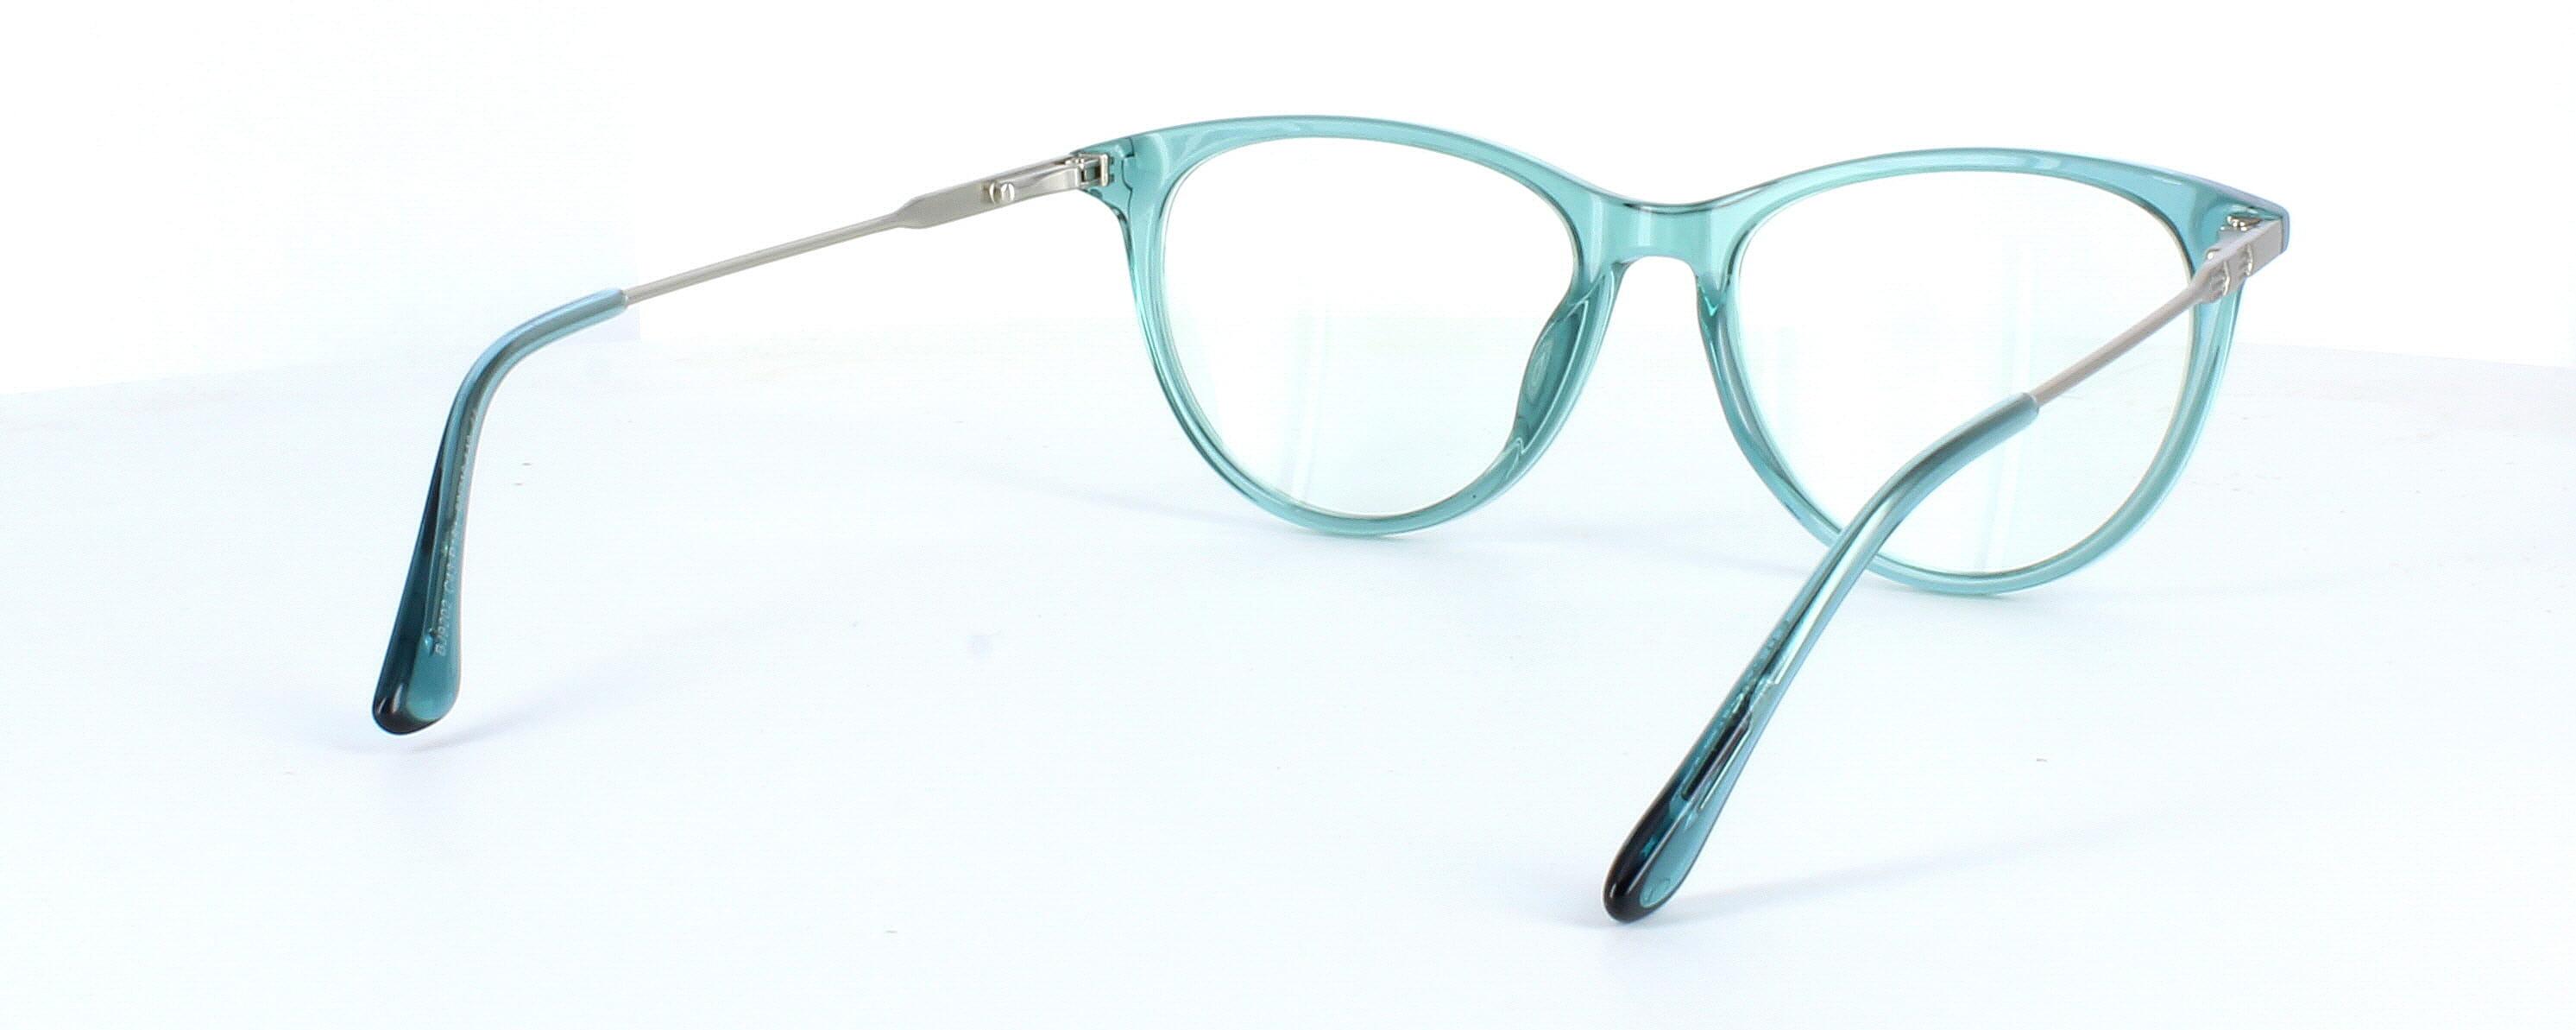 Edward Scotts BJ9201 C43 - Women's oval shaped shiny turquoise acetate glasses with gold metal spring hinged arms - image view 5